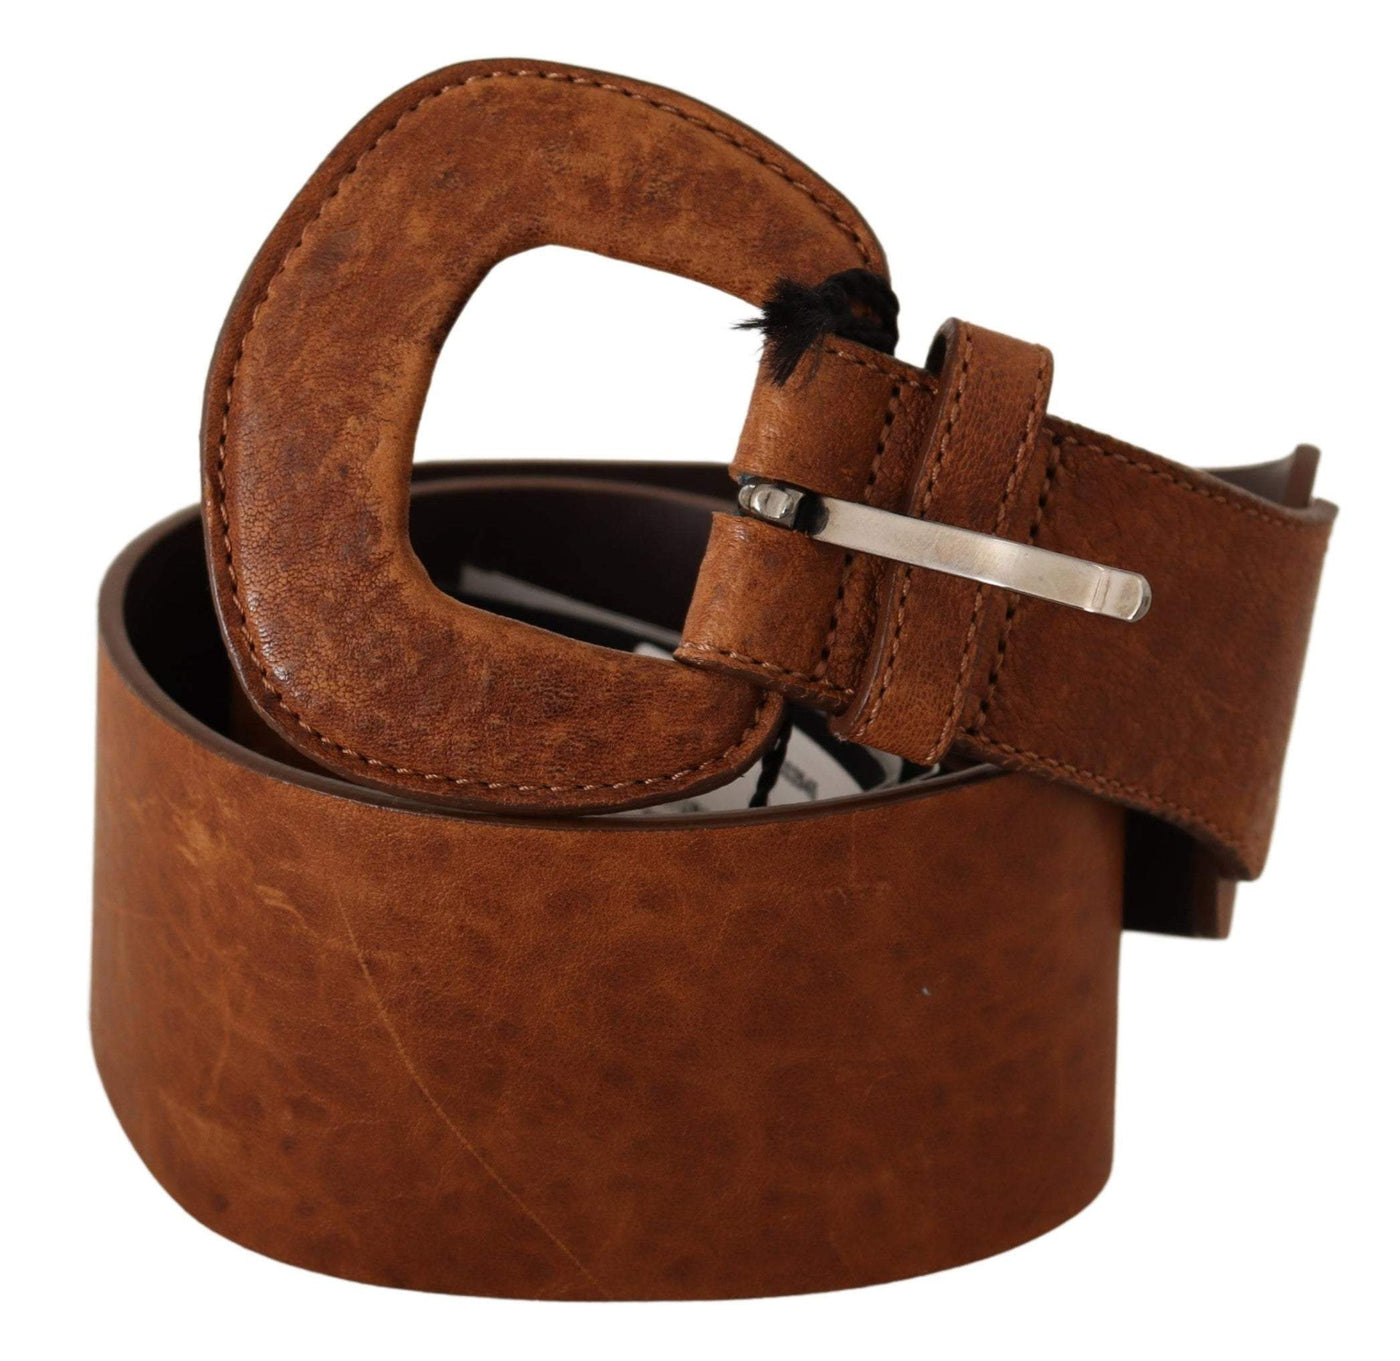 Costume National Brown Leather Fashion Waist Buckle Belt 80 cm / 32 Inches, Belts - Women - Accessories, Brown, Costume National, feed-1 at SEYMAYKA